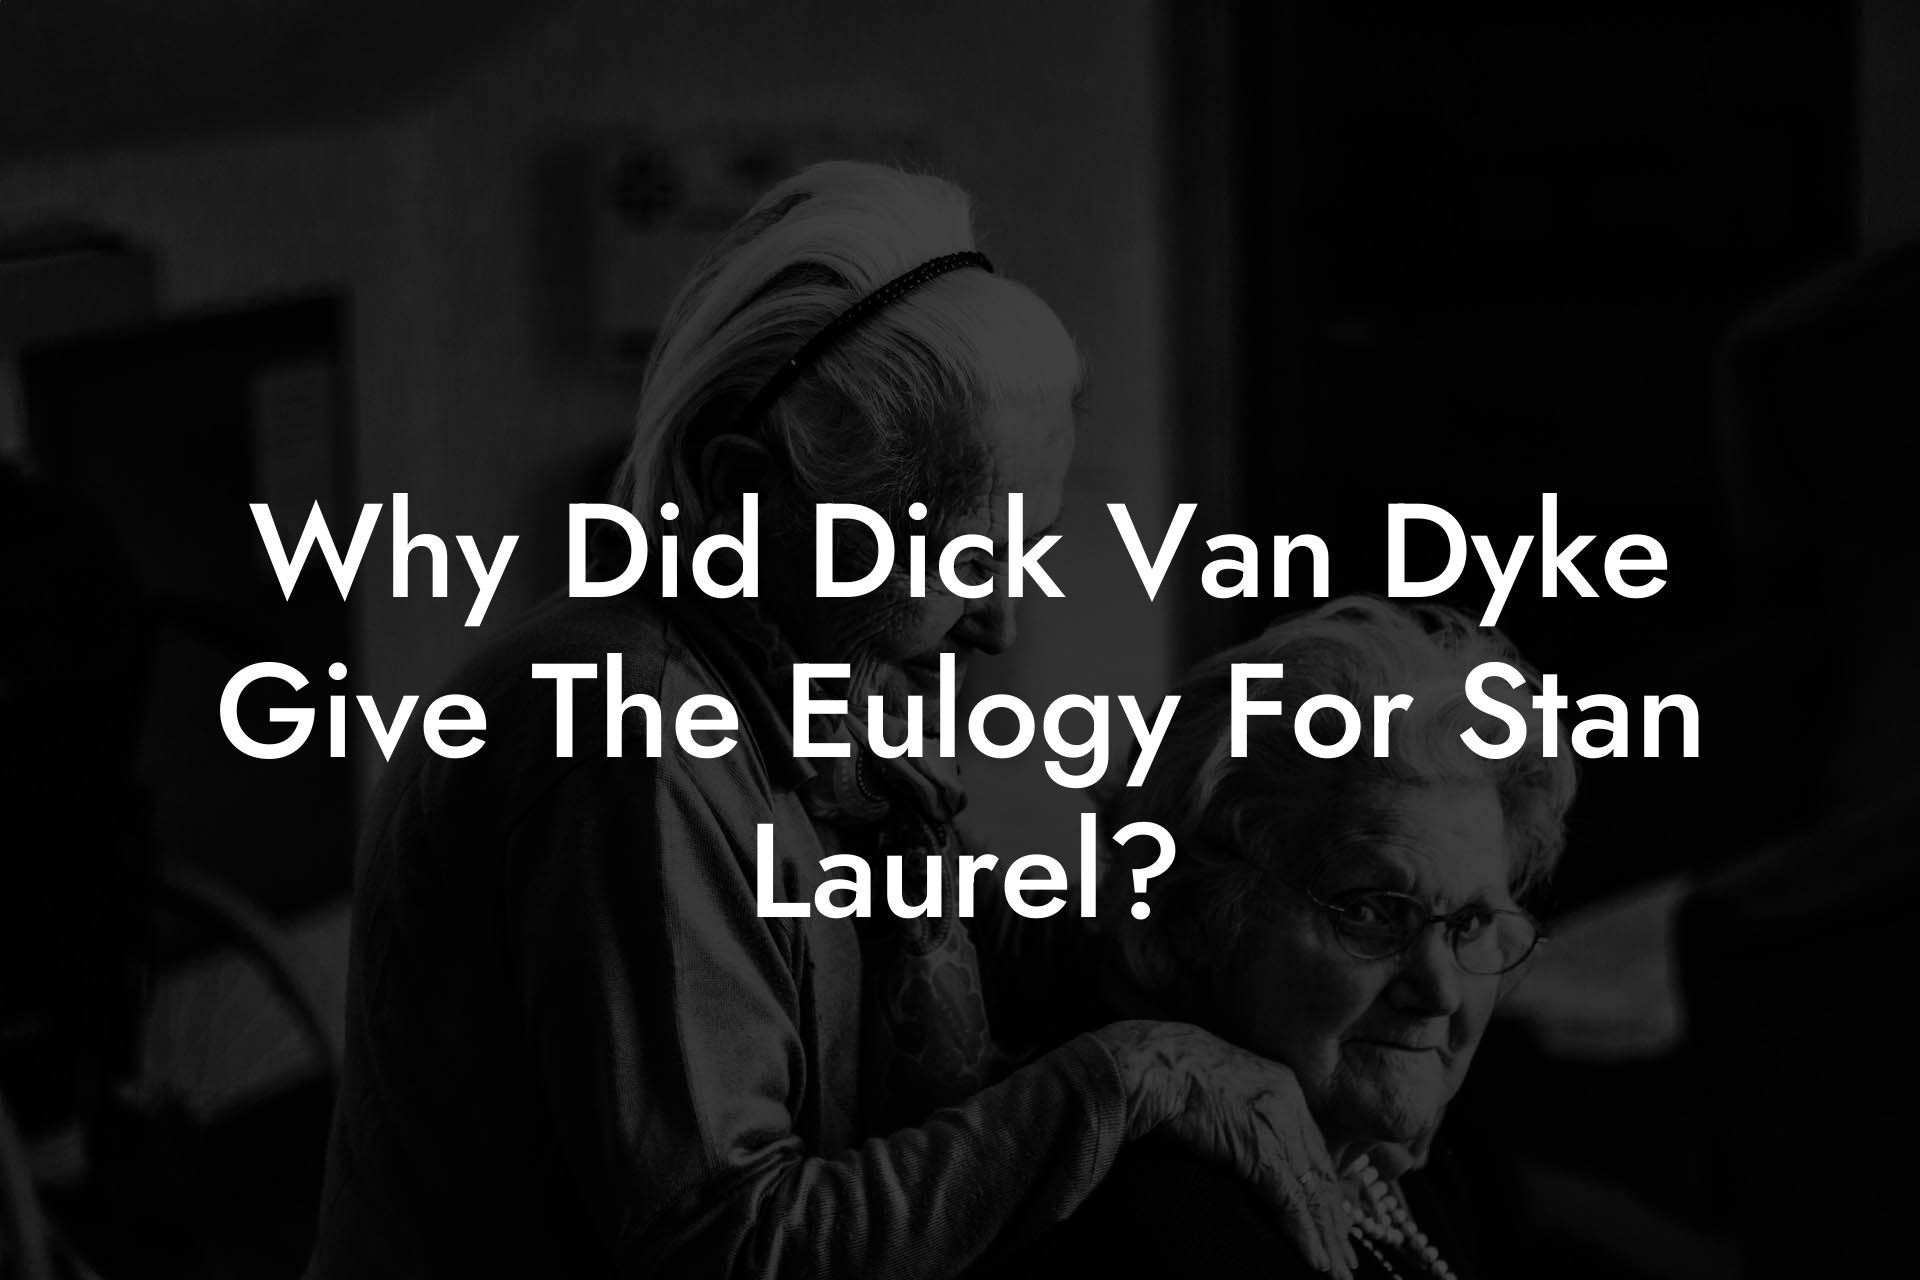 Why Did Dick Van Dyke Give The Eulogy For Stan Laurel?